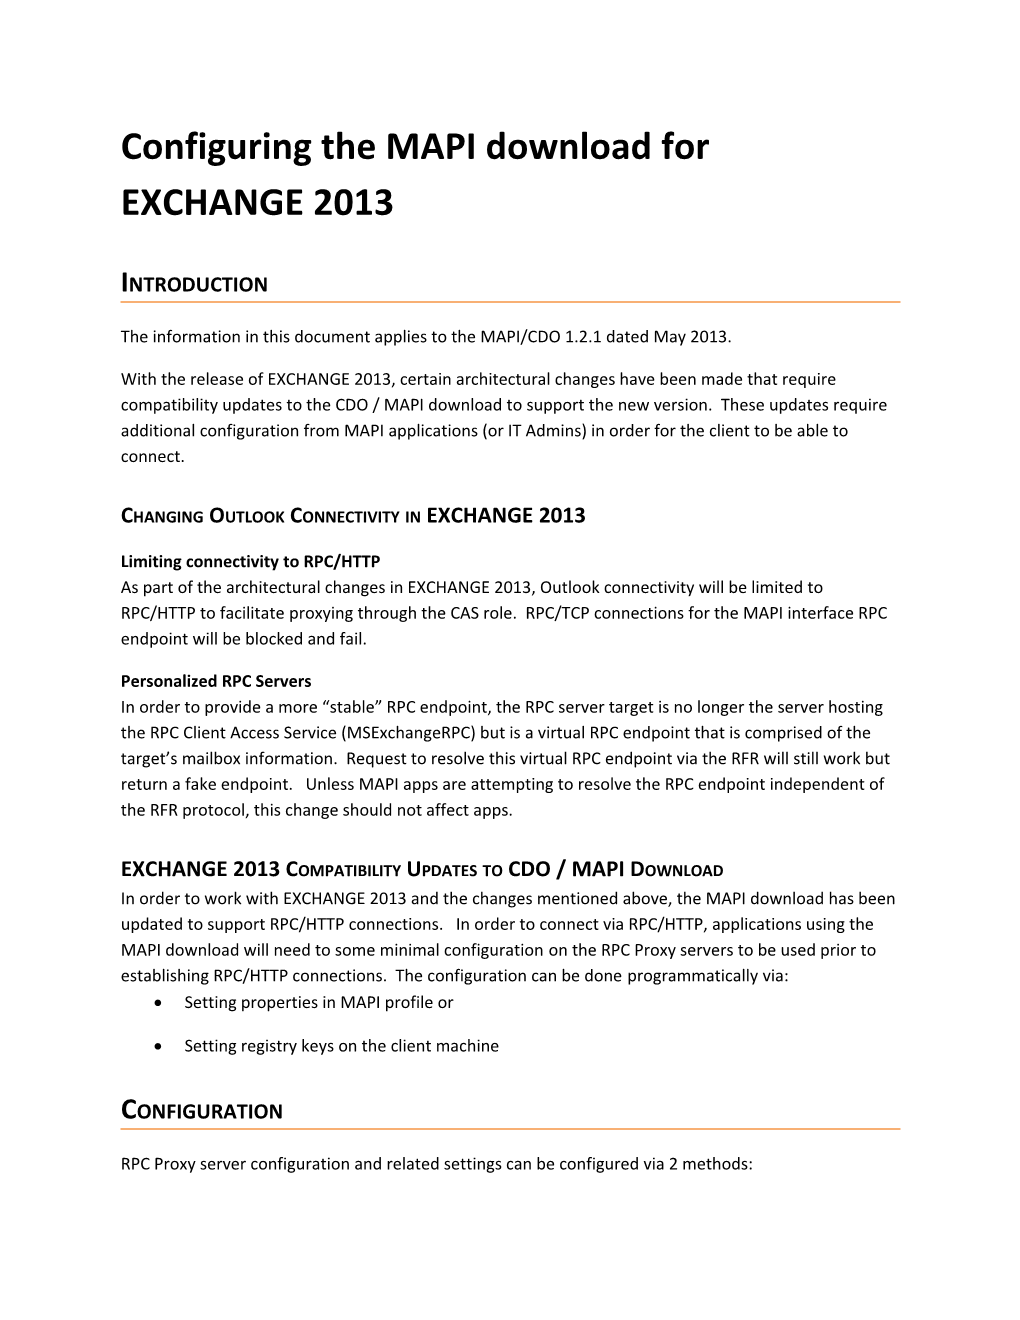 Configuring the MAPI Download for EXCHANGE 2013